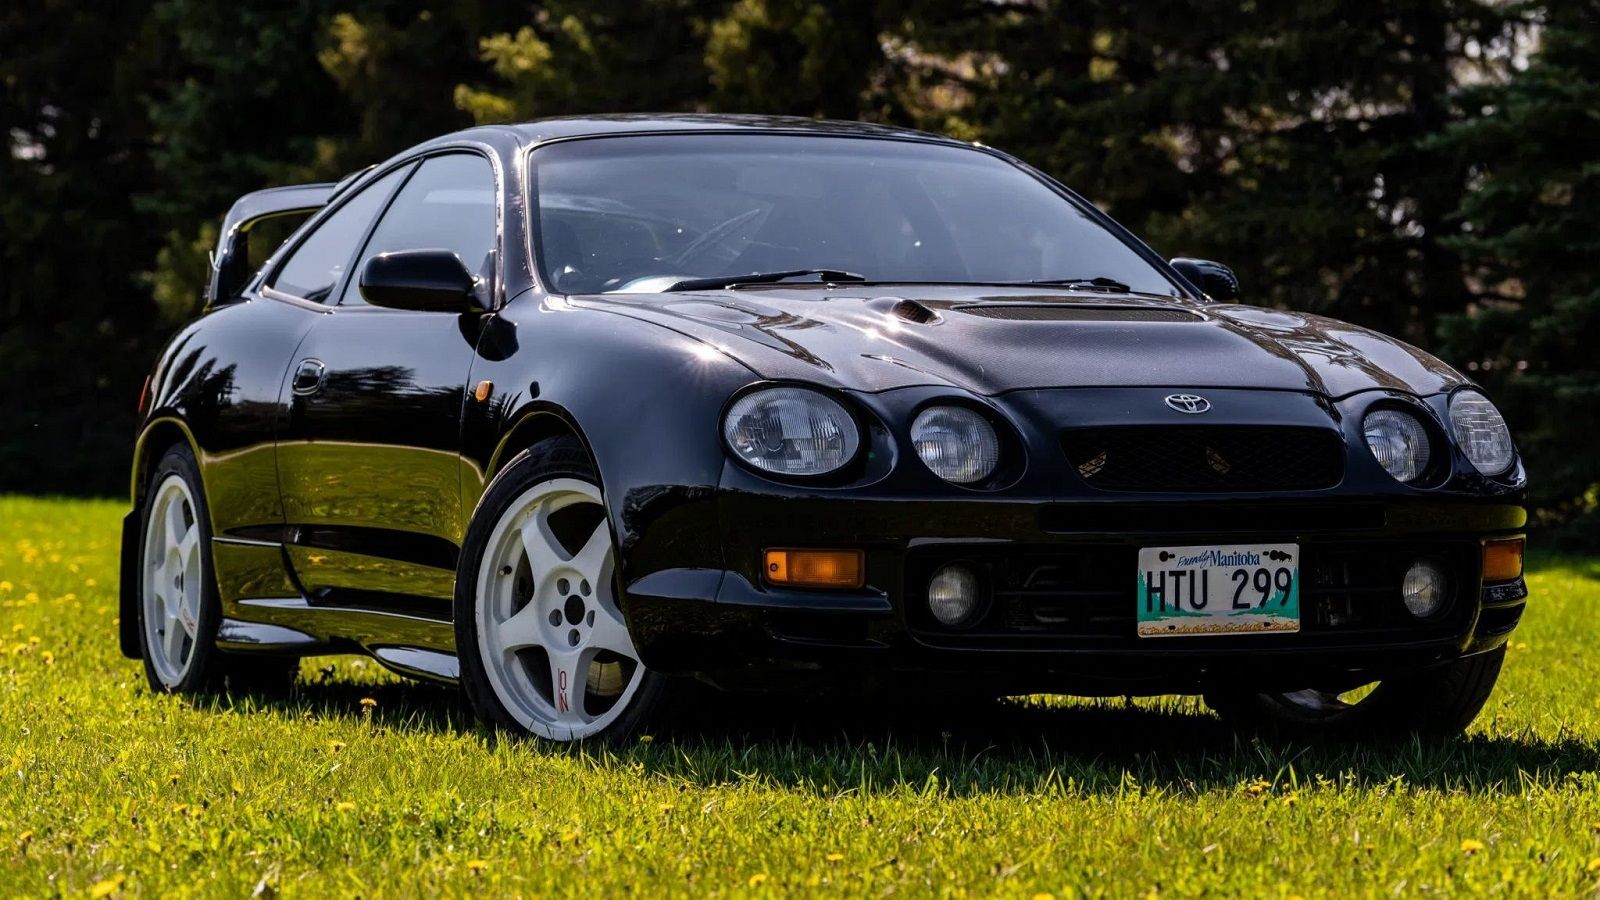 A parked 1994 Toyota Celica GT-Four